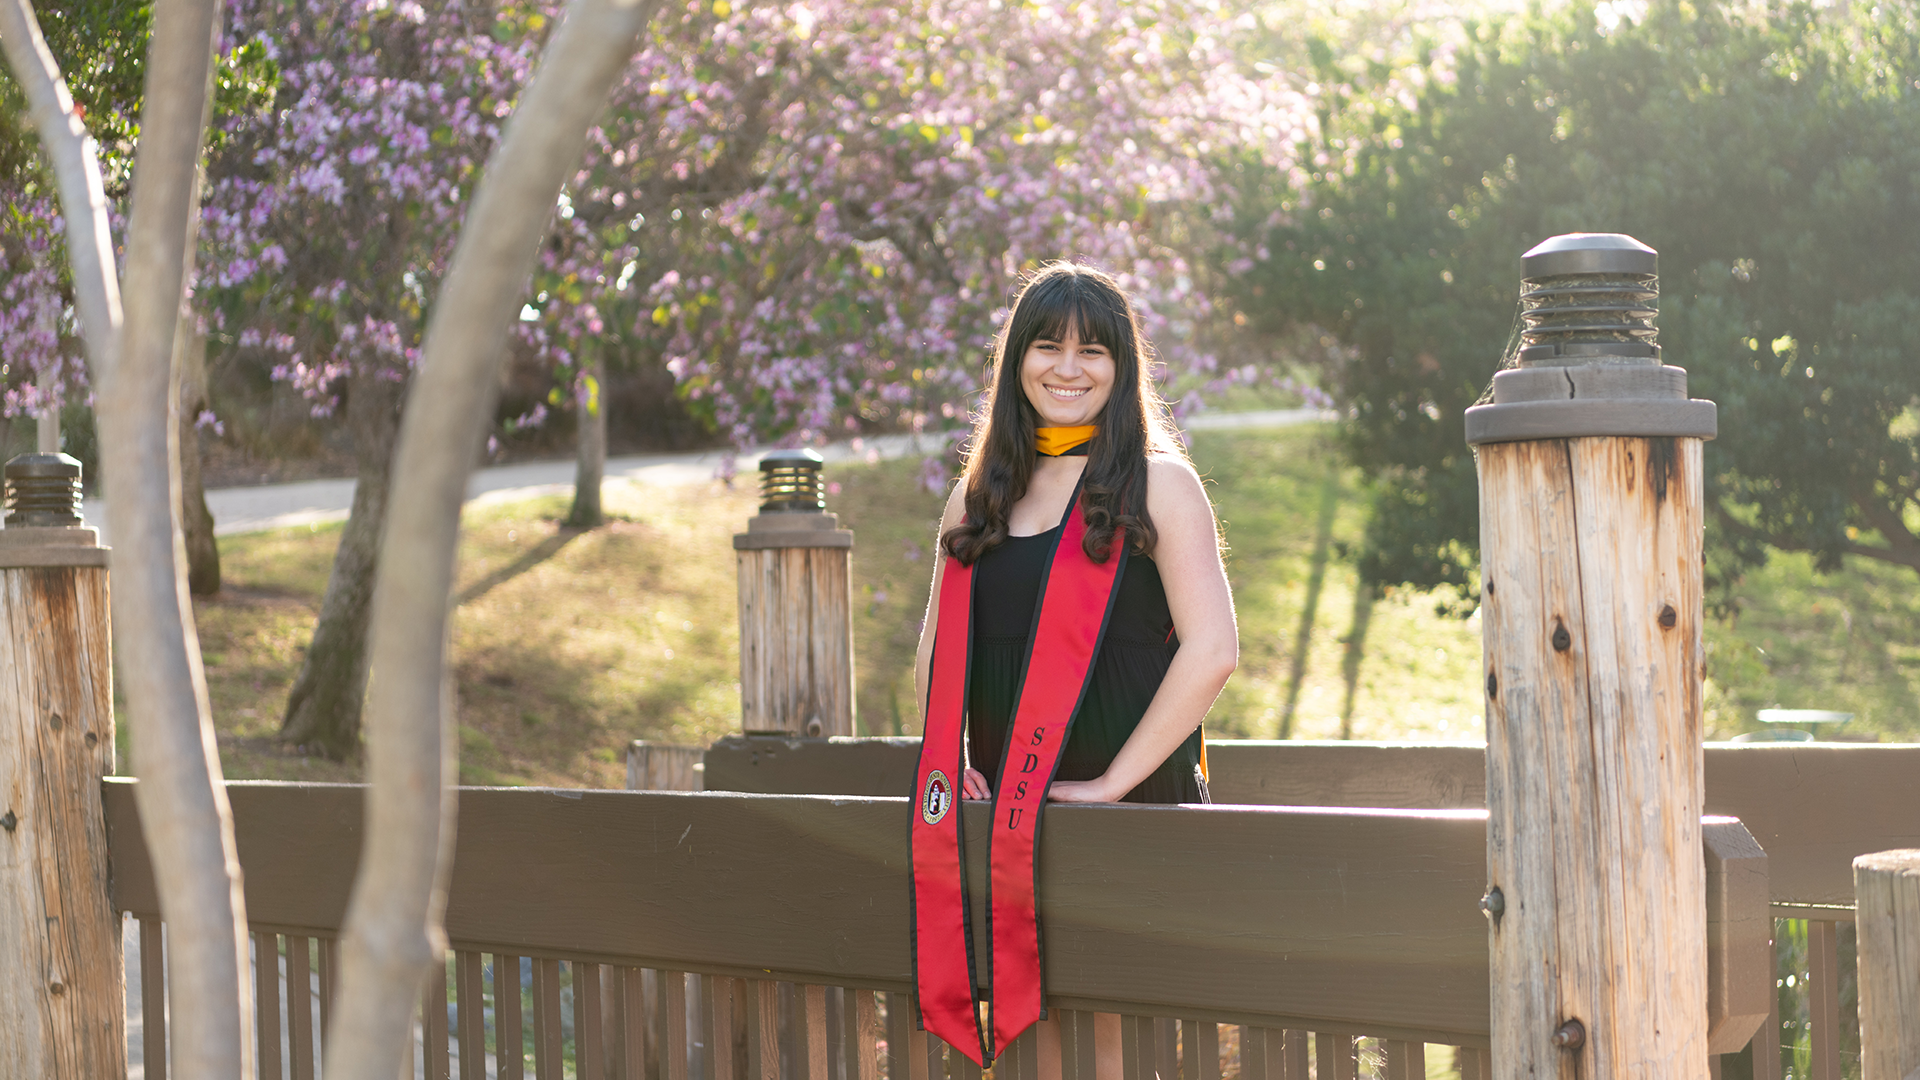 Woman with long dark brown hair wearing a black dress and red graduation sash stands on a bridge during golden hour. A tree with purple blossoms is int he background